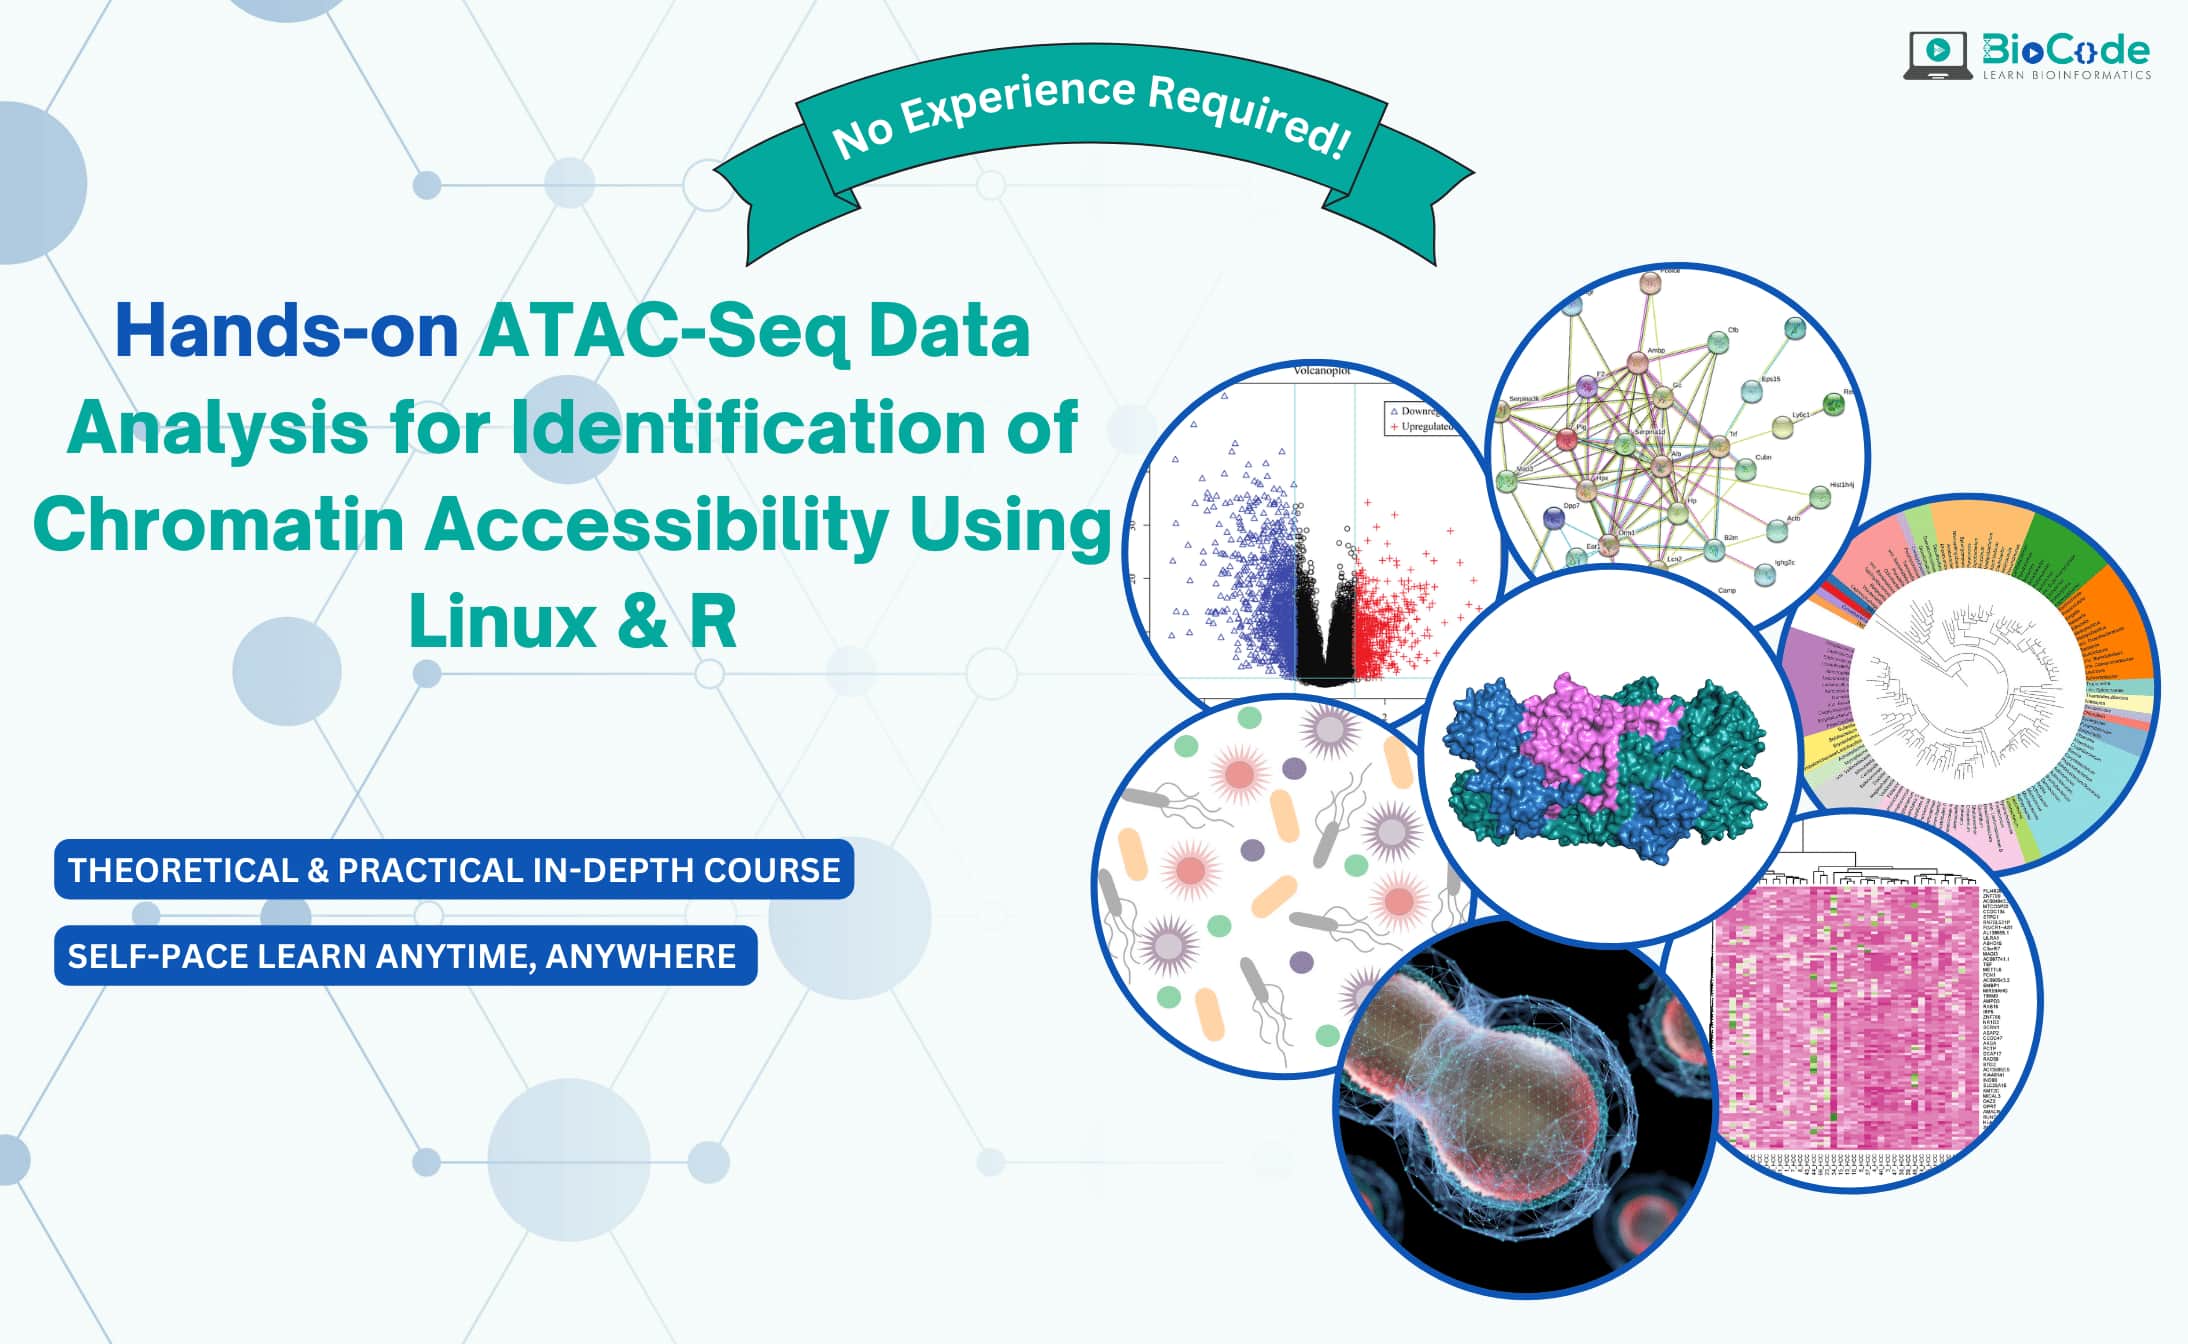 Hands-on ATAC-Seq Data Analysis for Identification of Chromatin Accessibility Using Linux & R